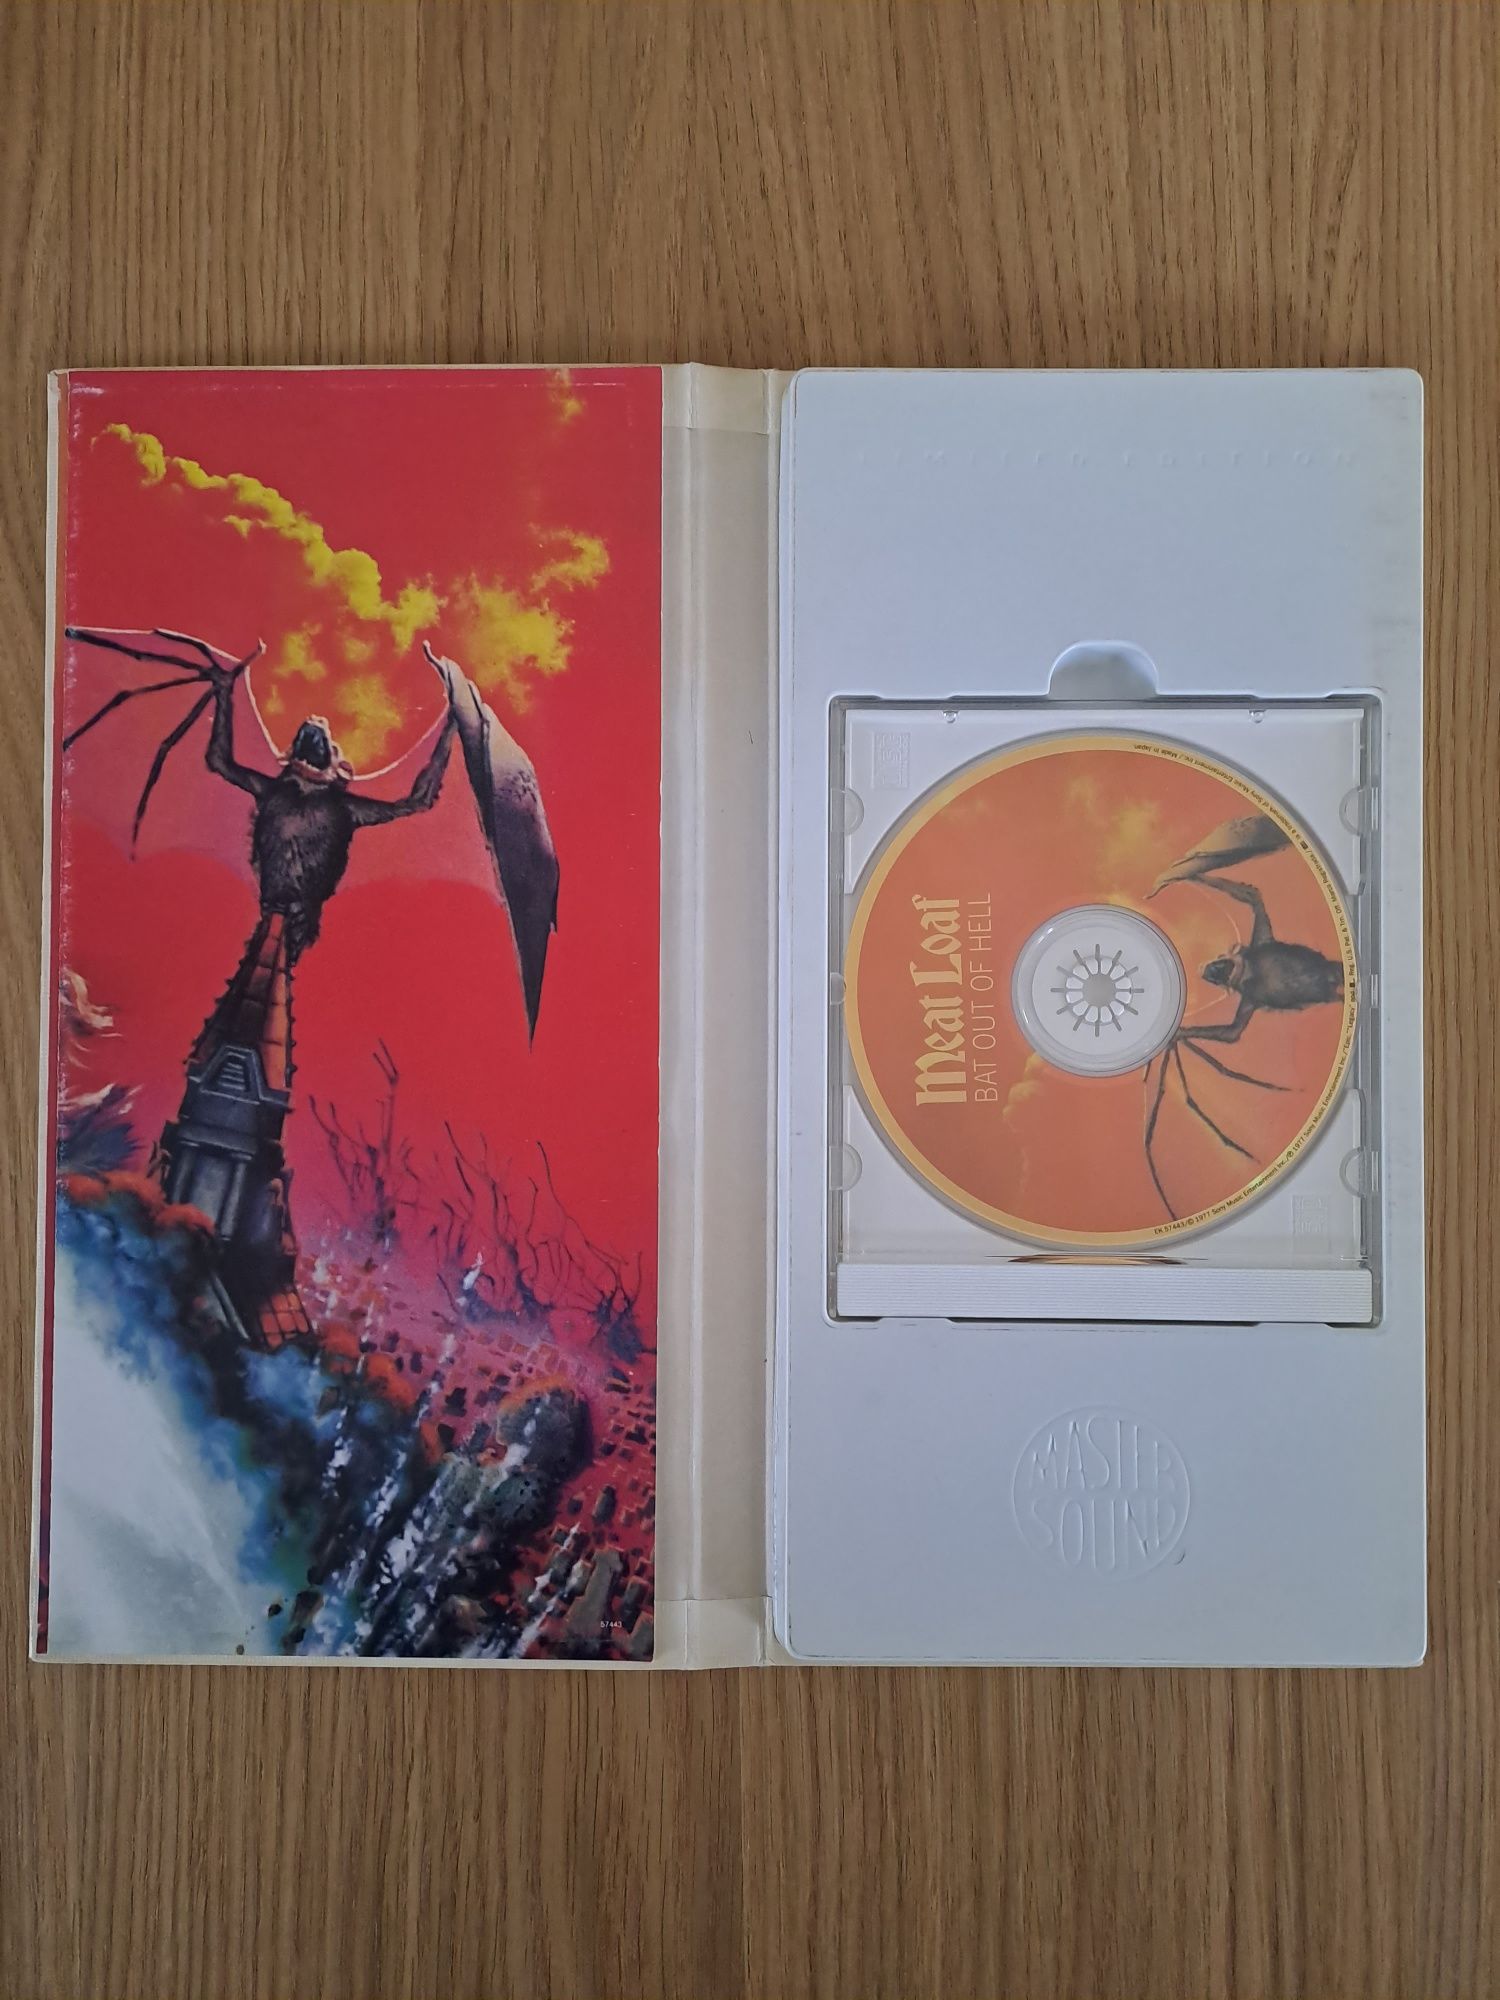 Meat Loaf - Bat Out Of Hell Limited Edition Płyta Master Sound.